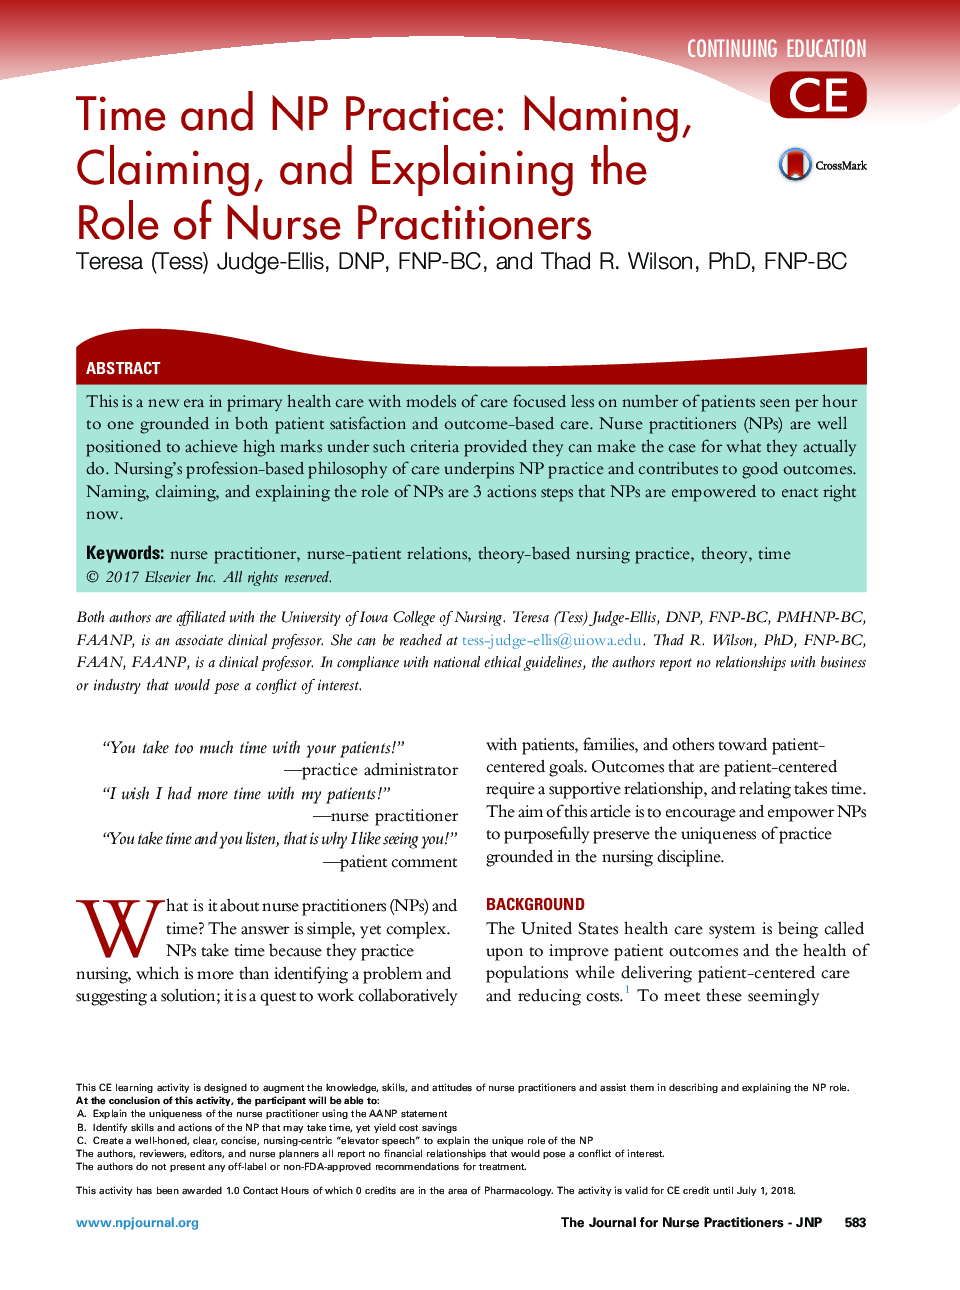 Time and NP Practice: Naming, Claiming, and Explaining the RoleÂ ofÂ Nurse Practitioners